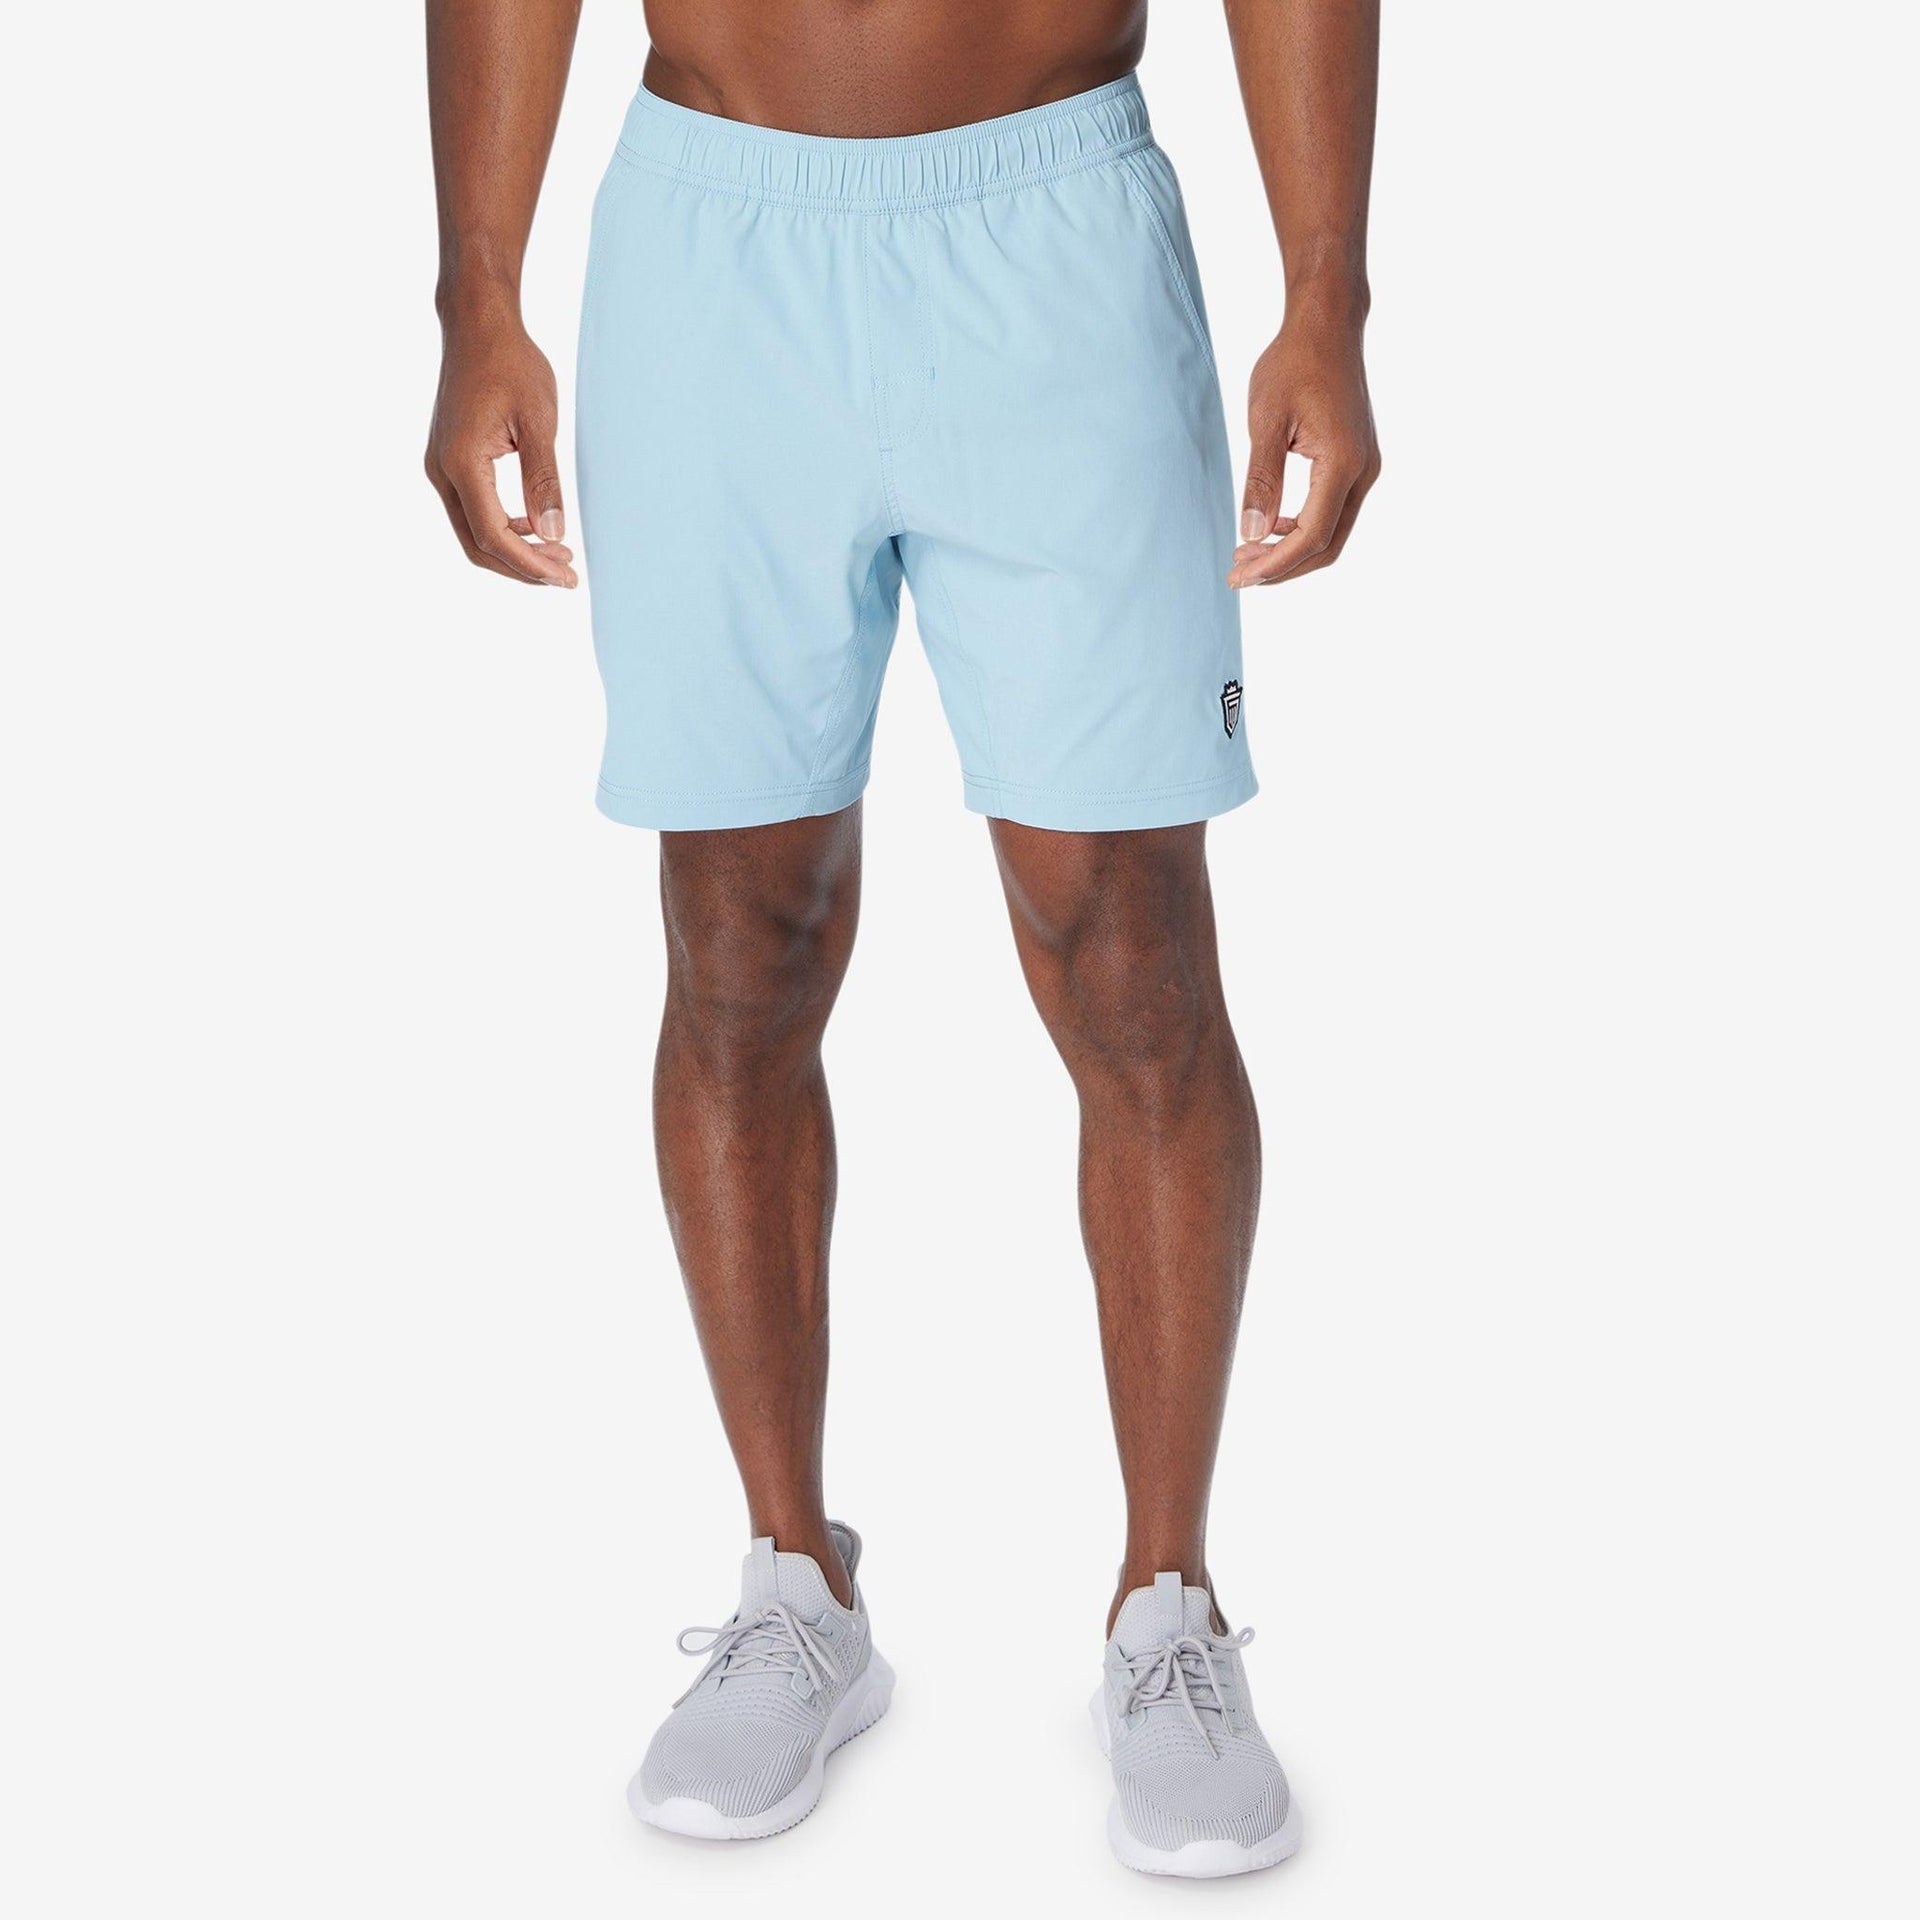 Core Tech Training Short Olive Gray – Greatness Wins